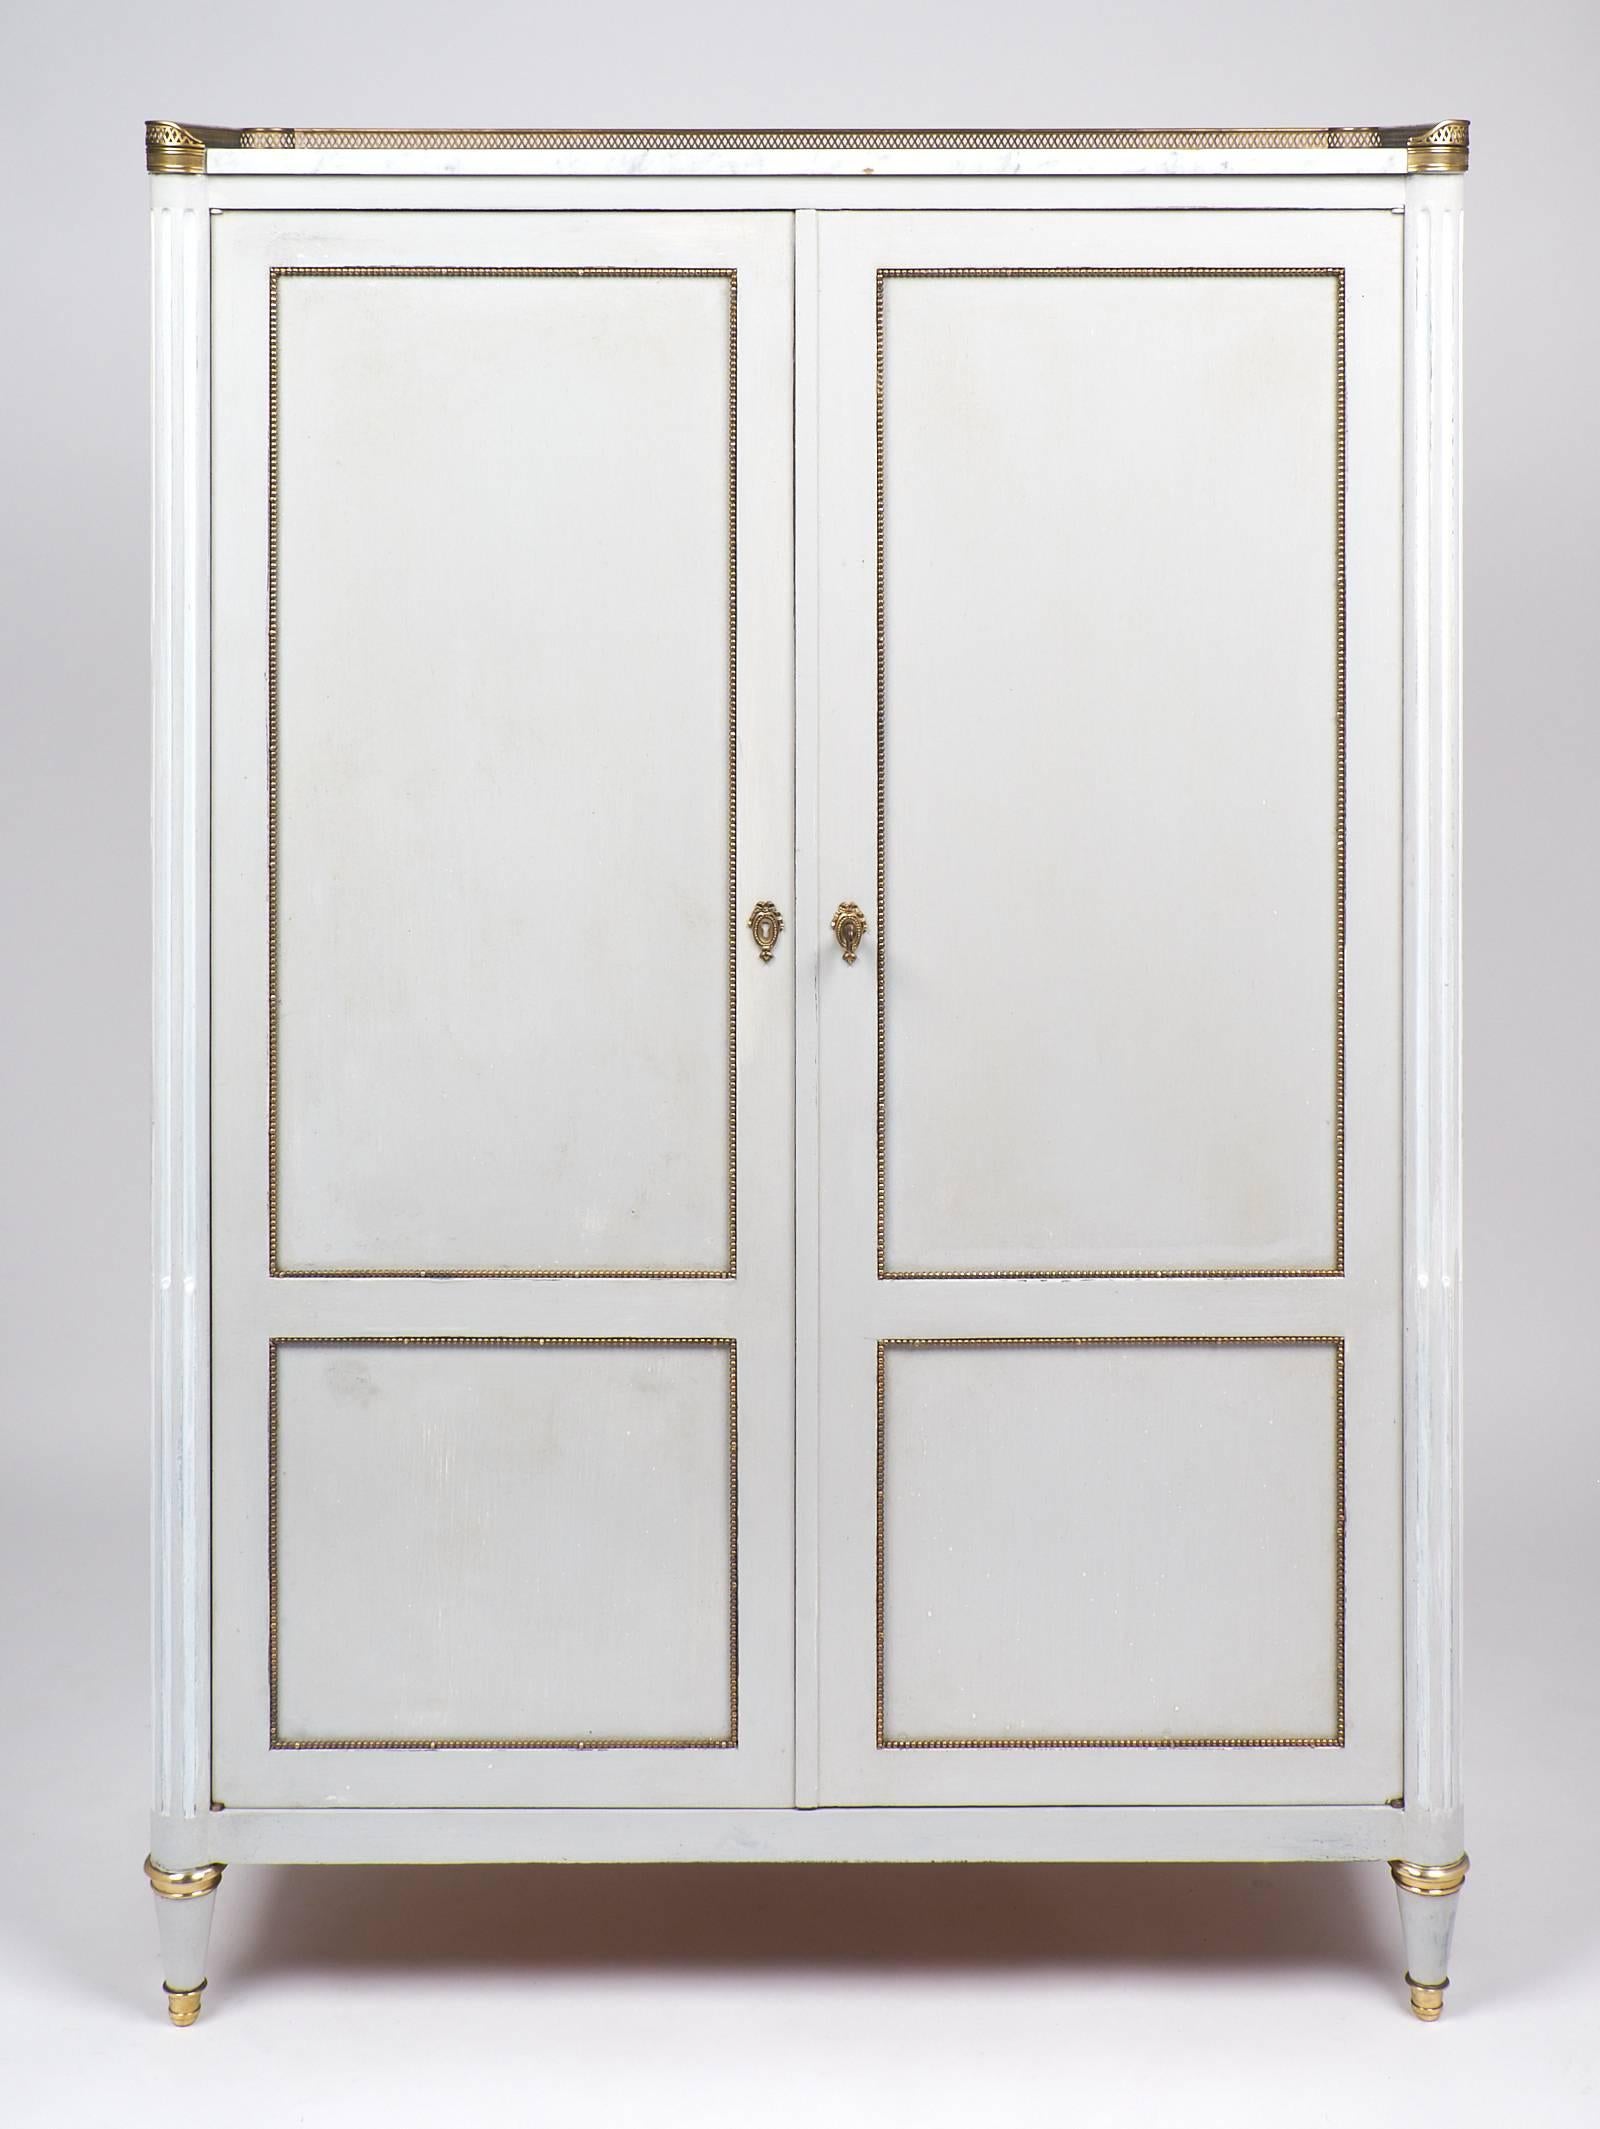 Antique mahogany Louis XVI armoire by Chaleyssin, from Lyon (signed in the back).
Carrara marble-top with an opened brass gallery. Brass hardware and feet, brass trims throughout, a superb construction for a great looking and efficient storage piece.